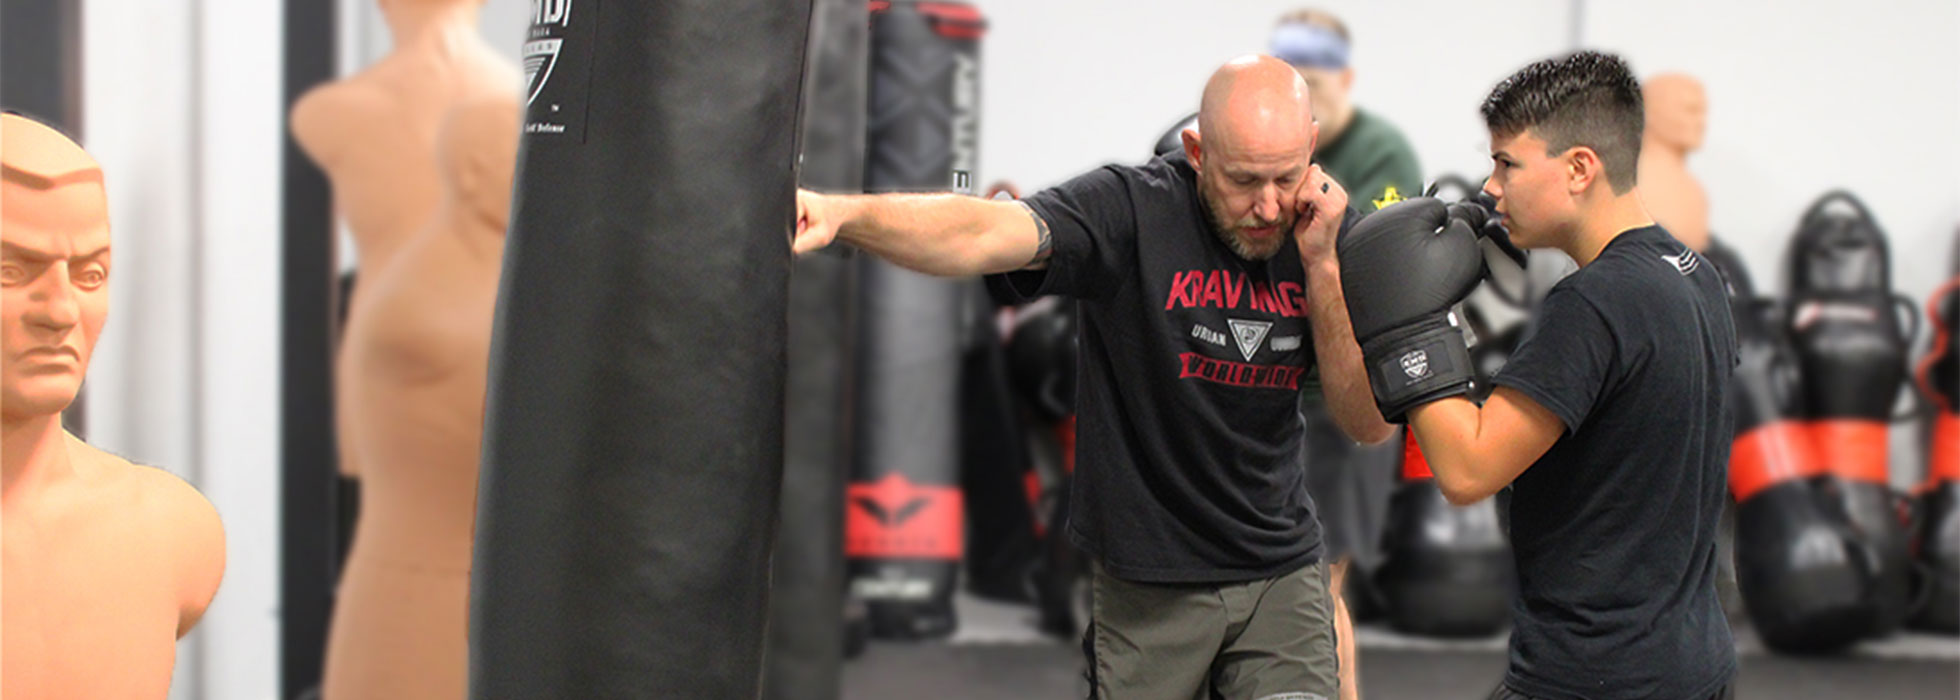 Martial Arts Classes For Kids And Adults Near Frisco